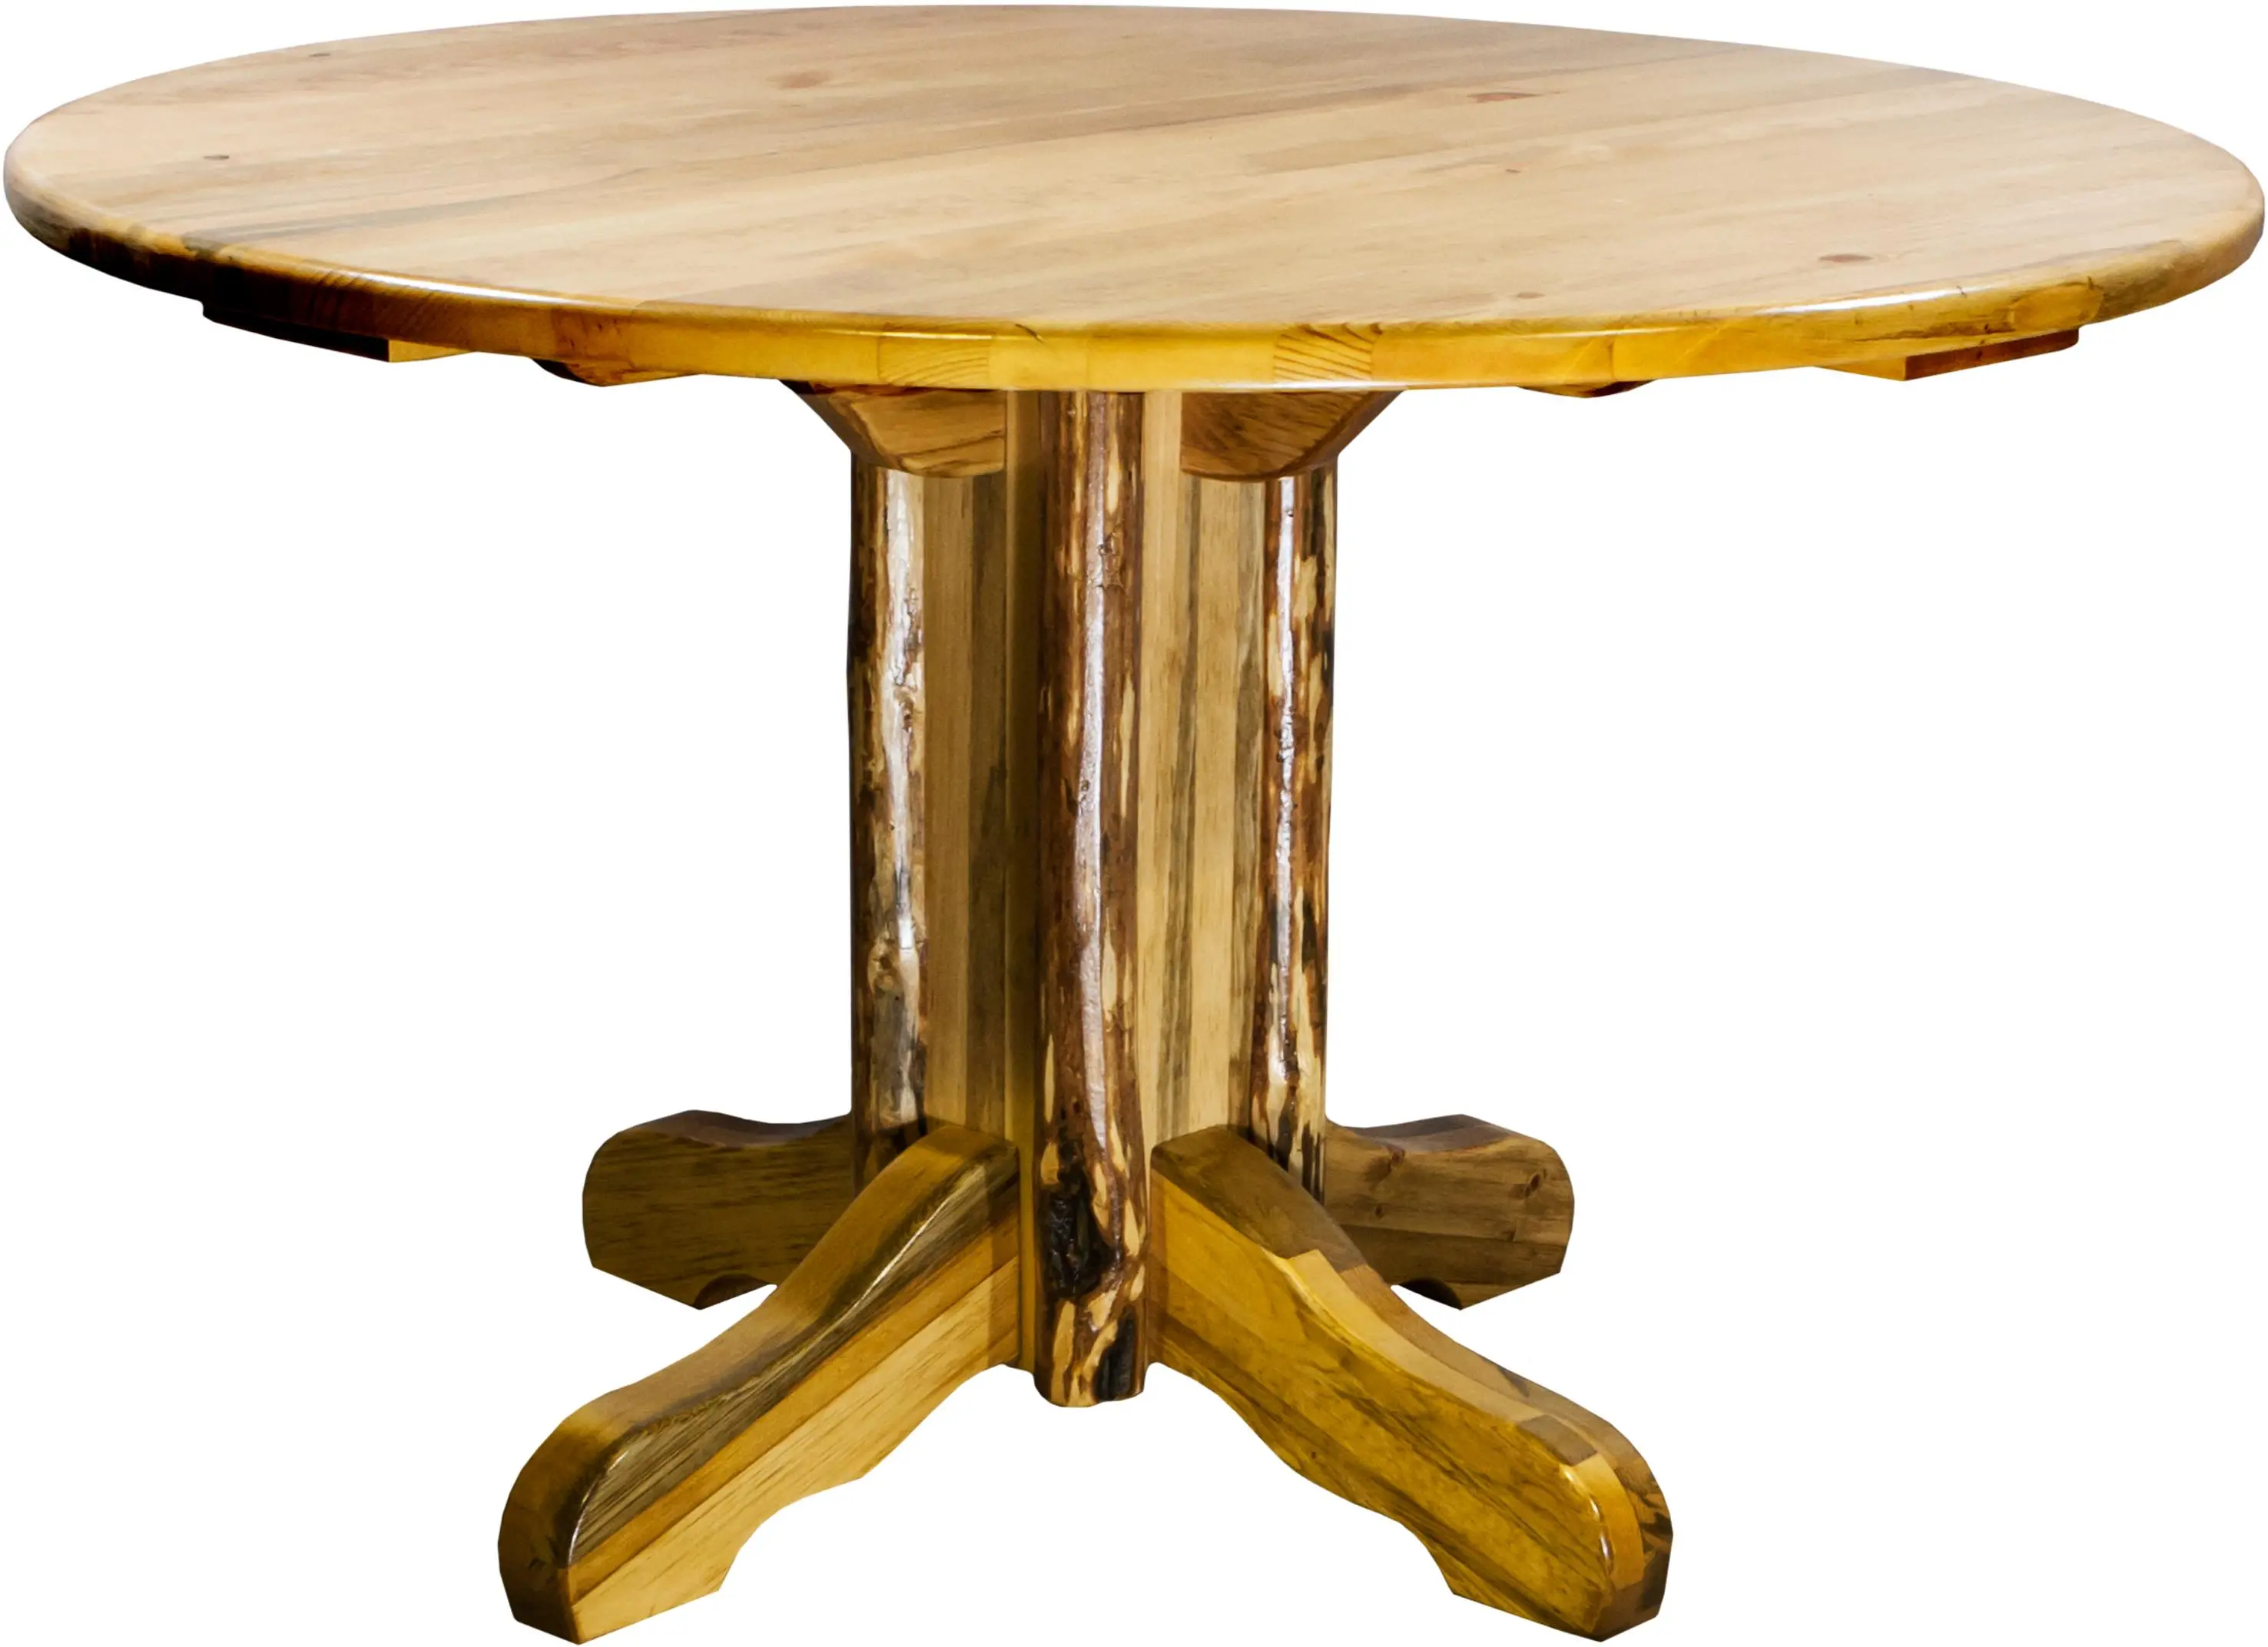 Glacier Country Rustic Wood Round Dining Room Table